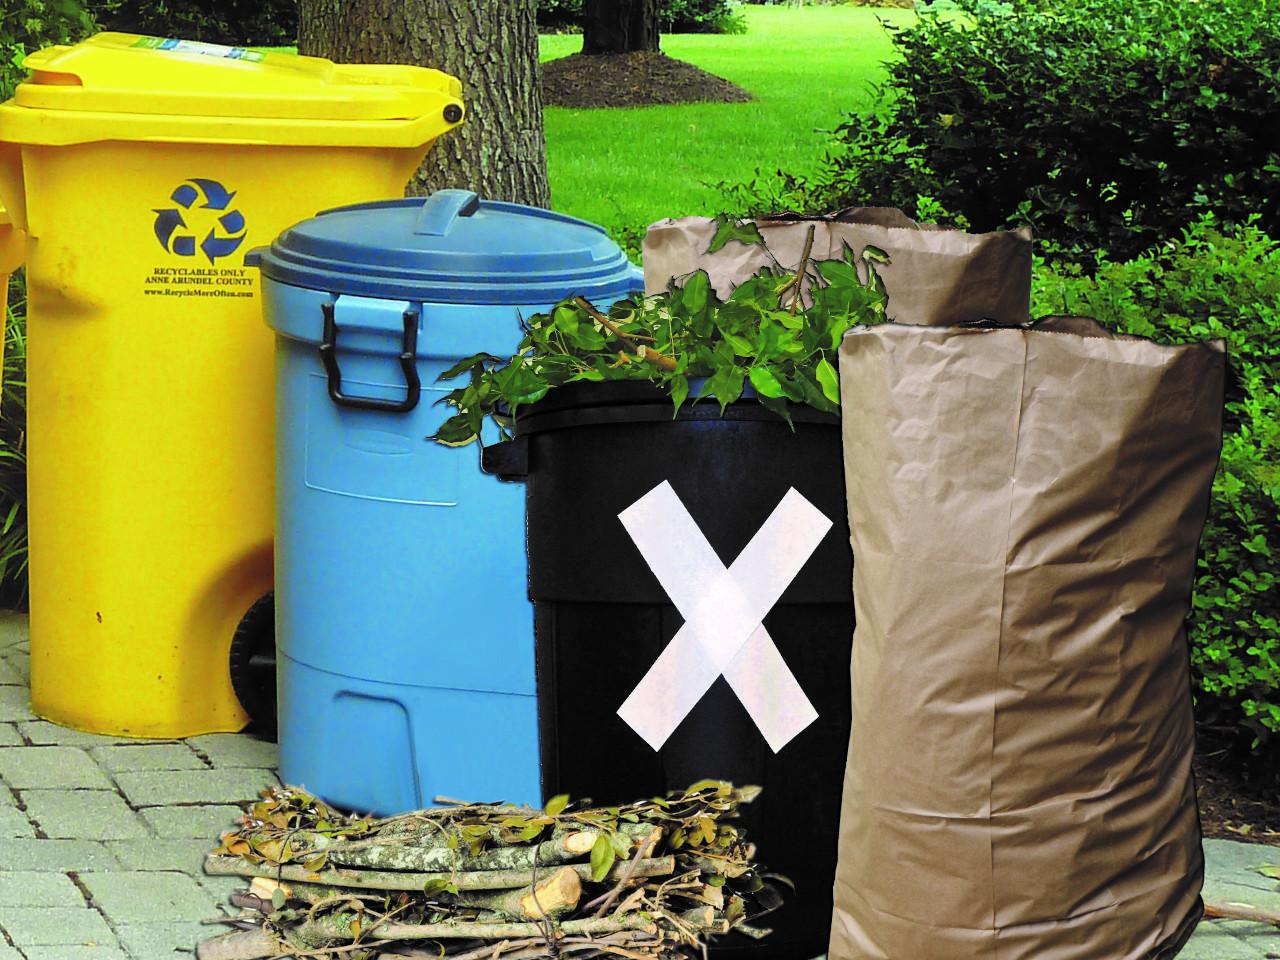 City ready to swap out trash cans, City government